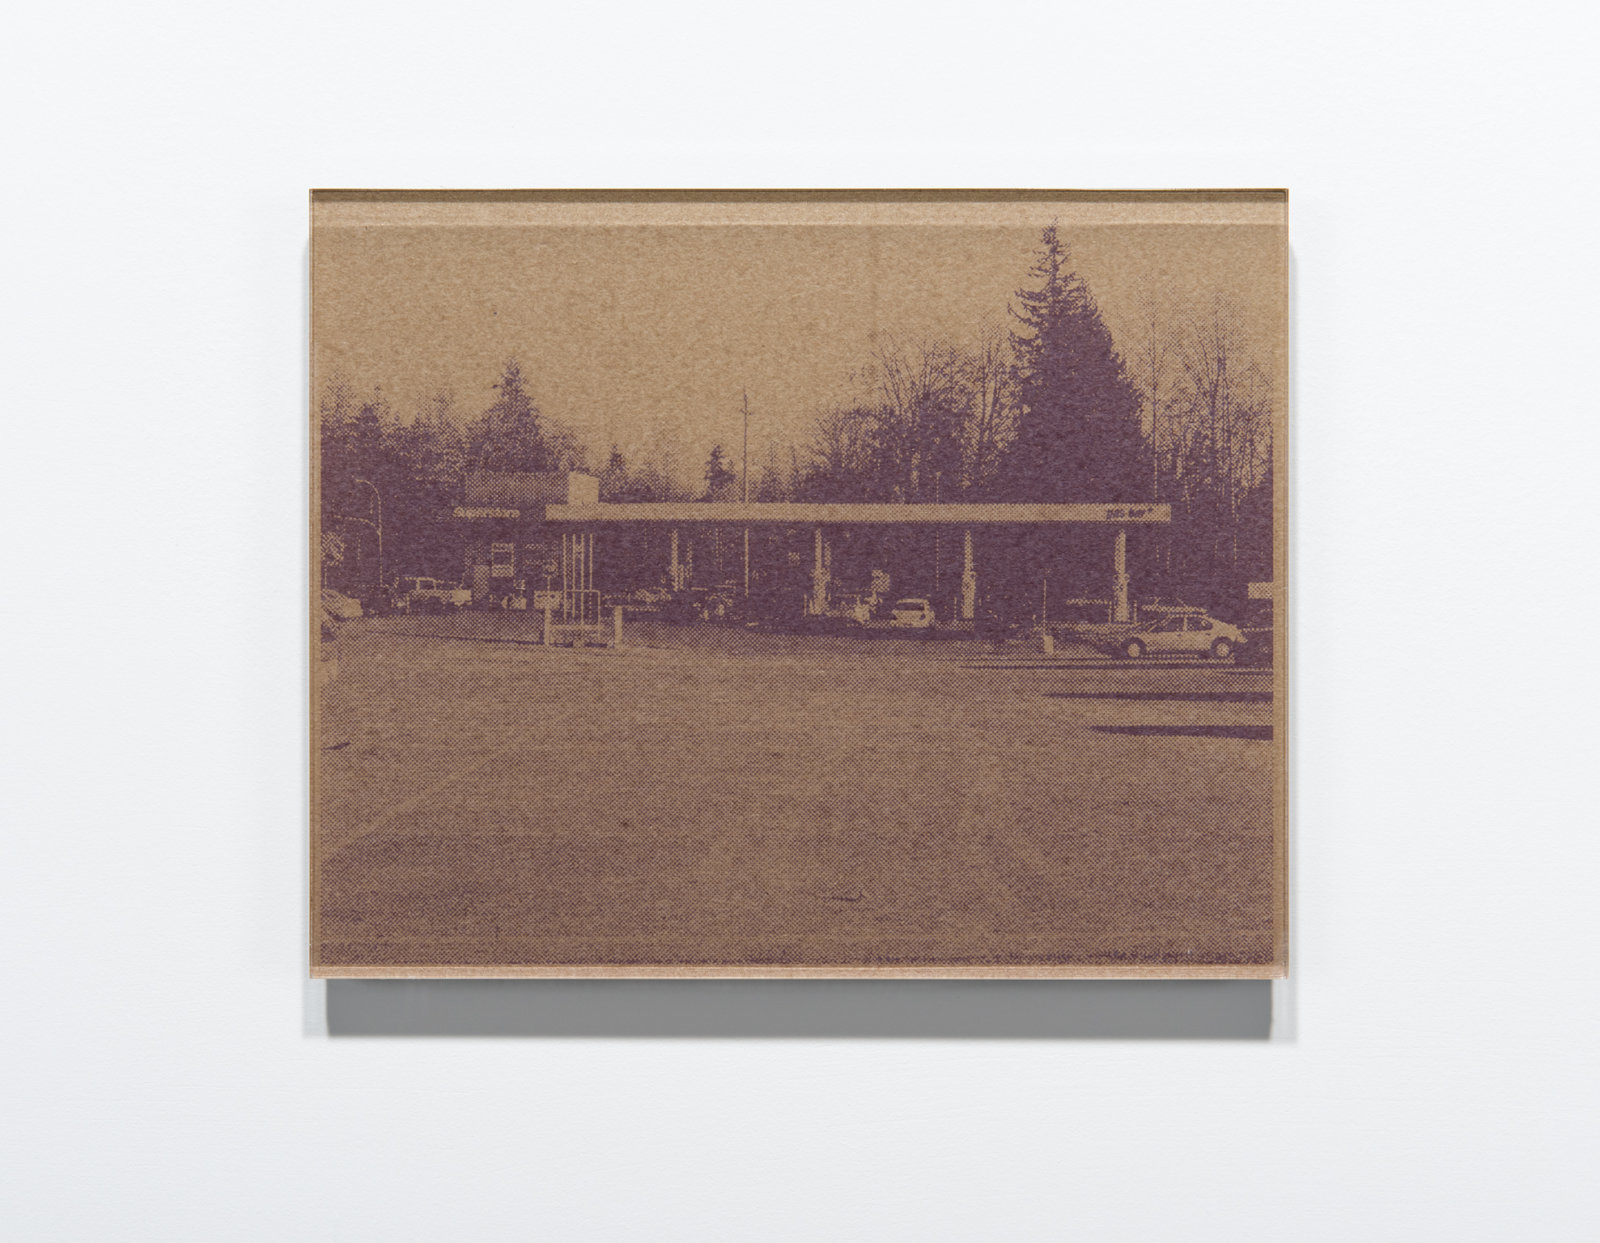 Raymond Boisjoly, 333 Seymour Blvd. North Vancouver, BC, 2012, sunlight, construction paper, acrylic glass, blackened positive, 8 x 10 in. (20 x 25 cm)